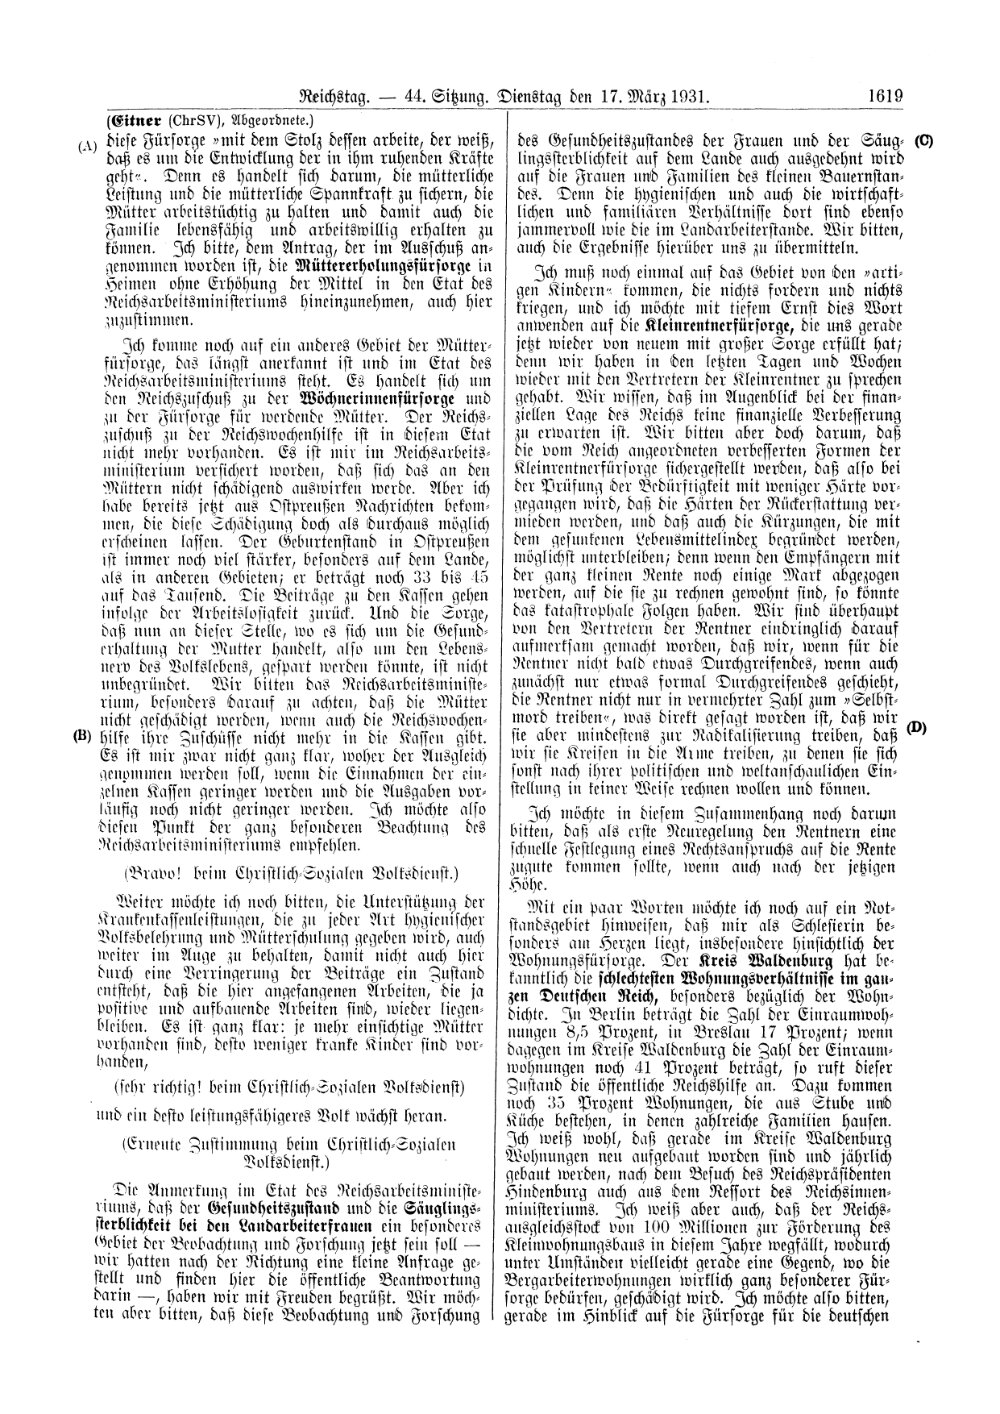 Scan of page 1619